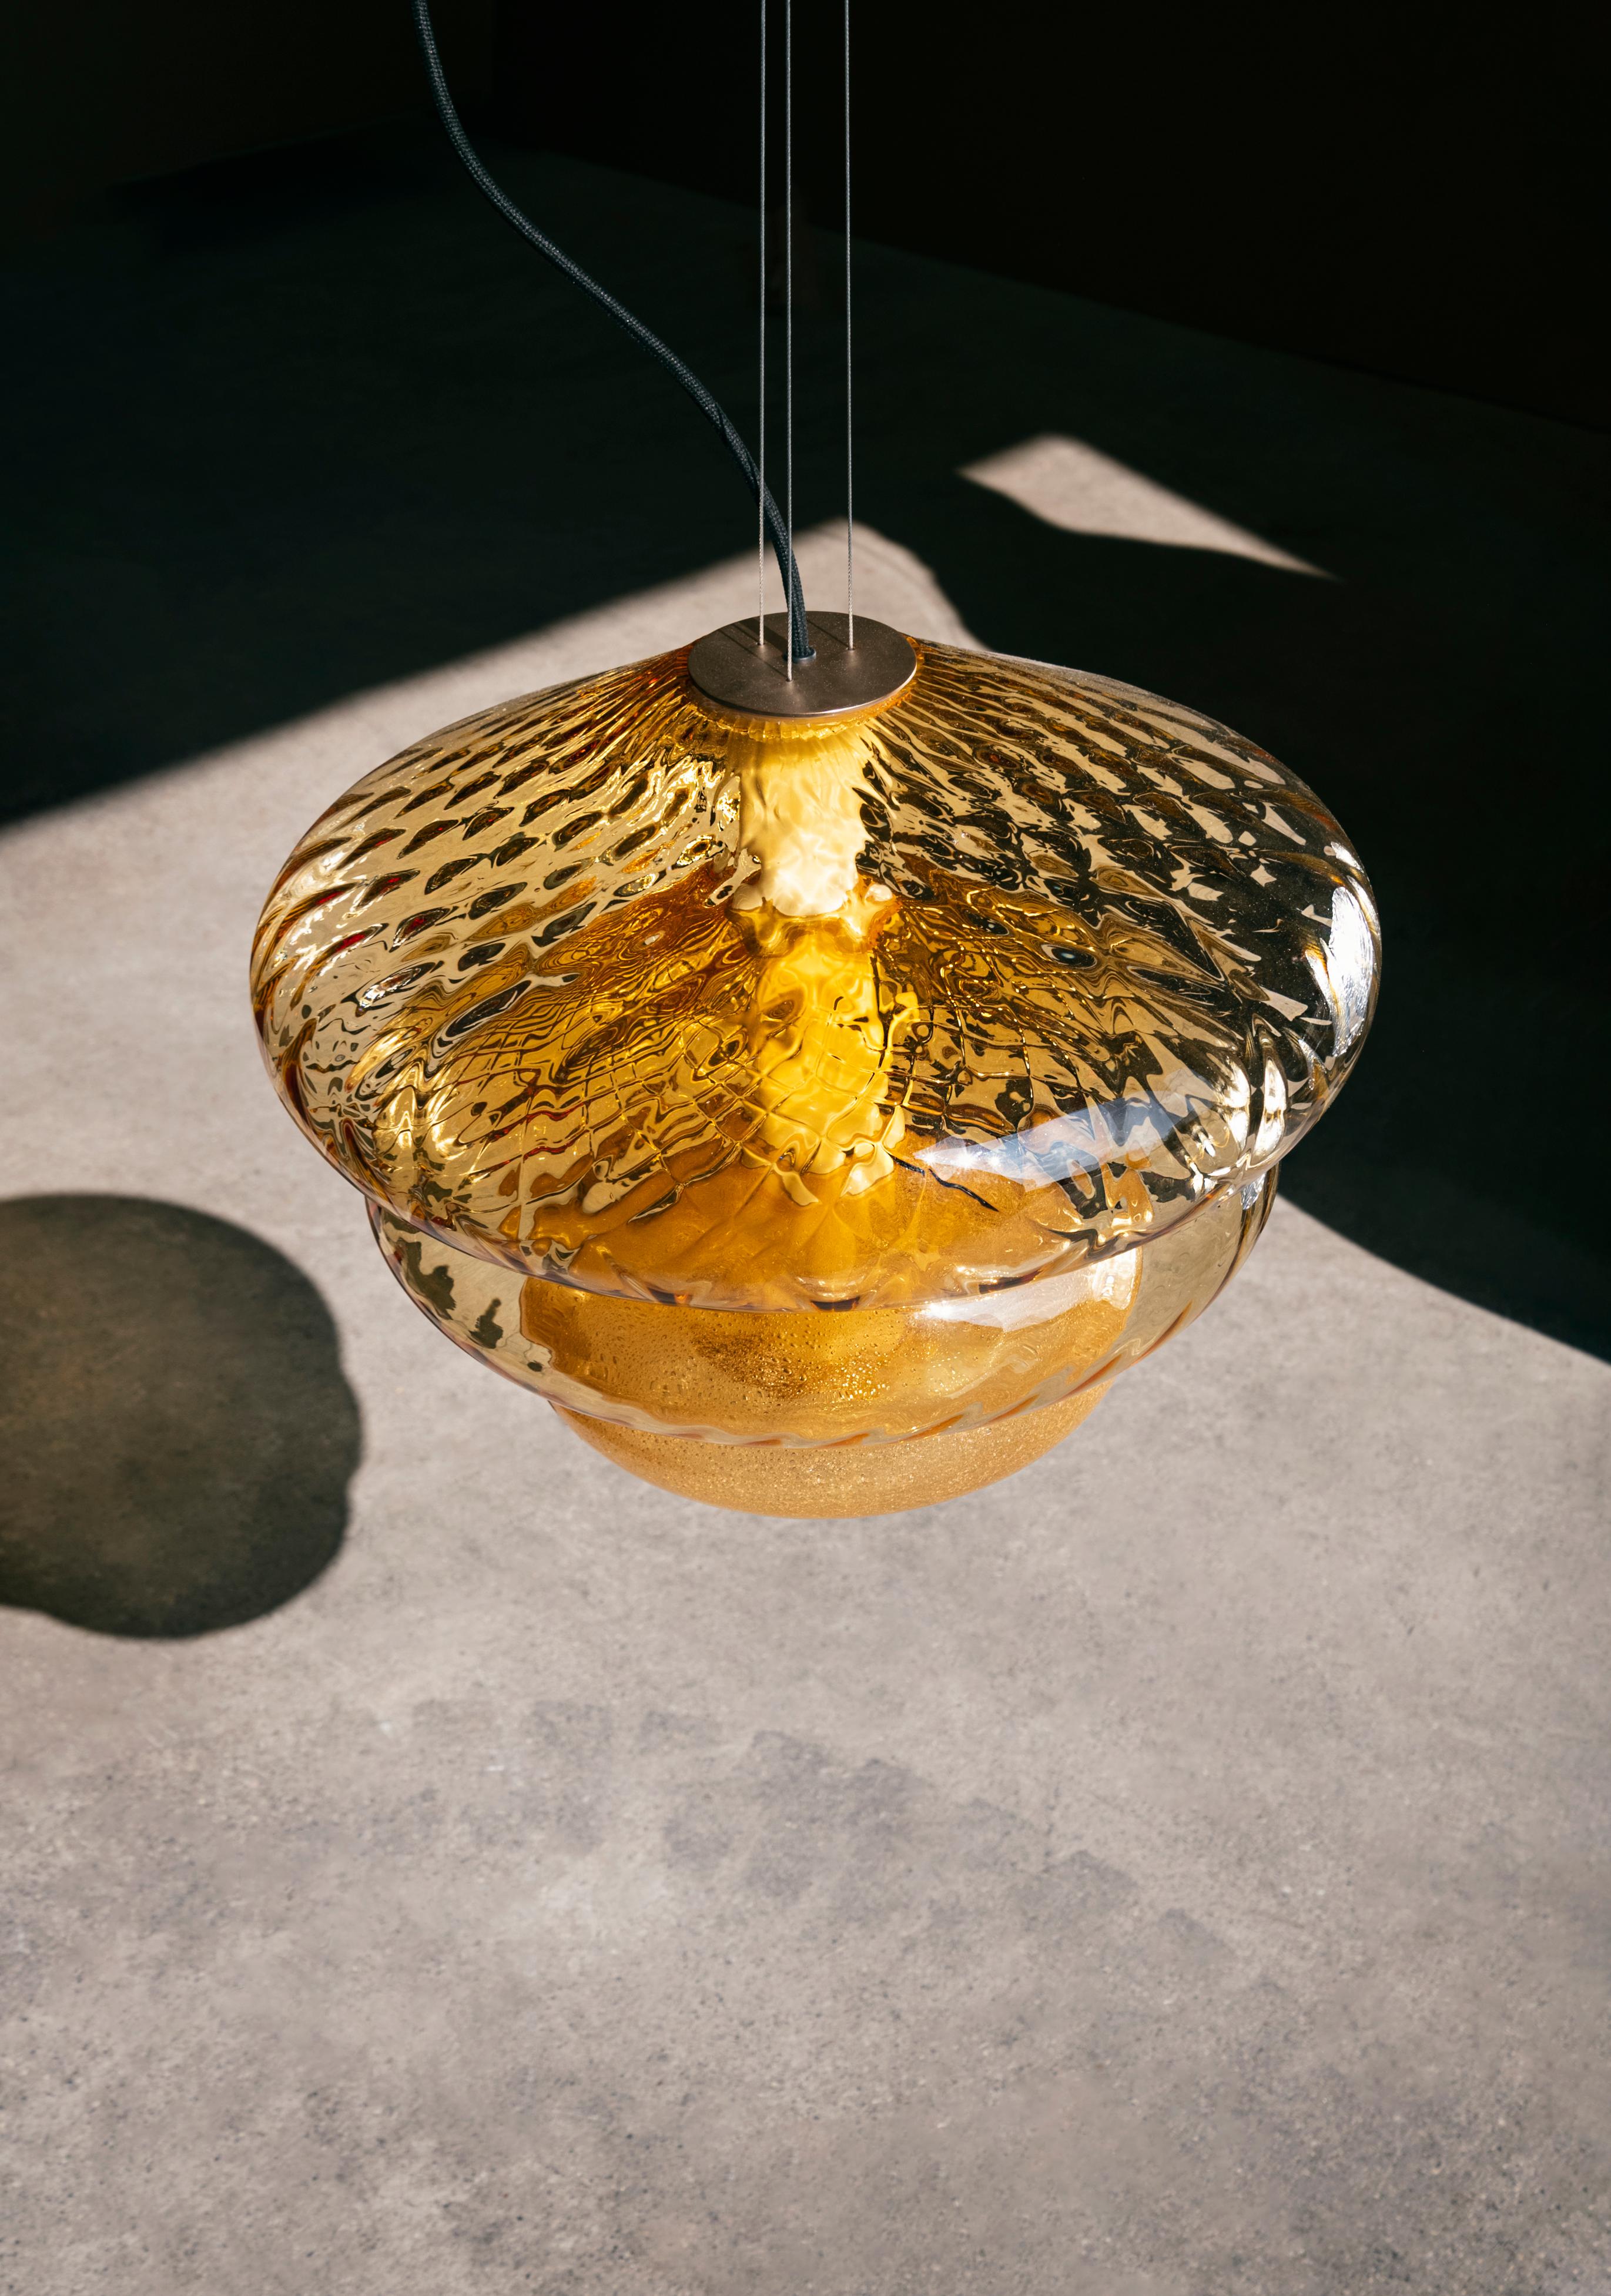 Alone or clustered, with a choice of three colours, Tima pendant lamp can illuminate and enrich both the home and contract environments.
In the roundness of their sinuous bodies and surprising transparencies, jellyfish illuminate the darkness of